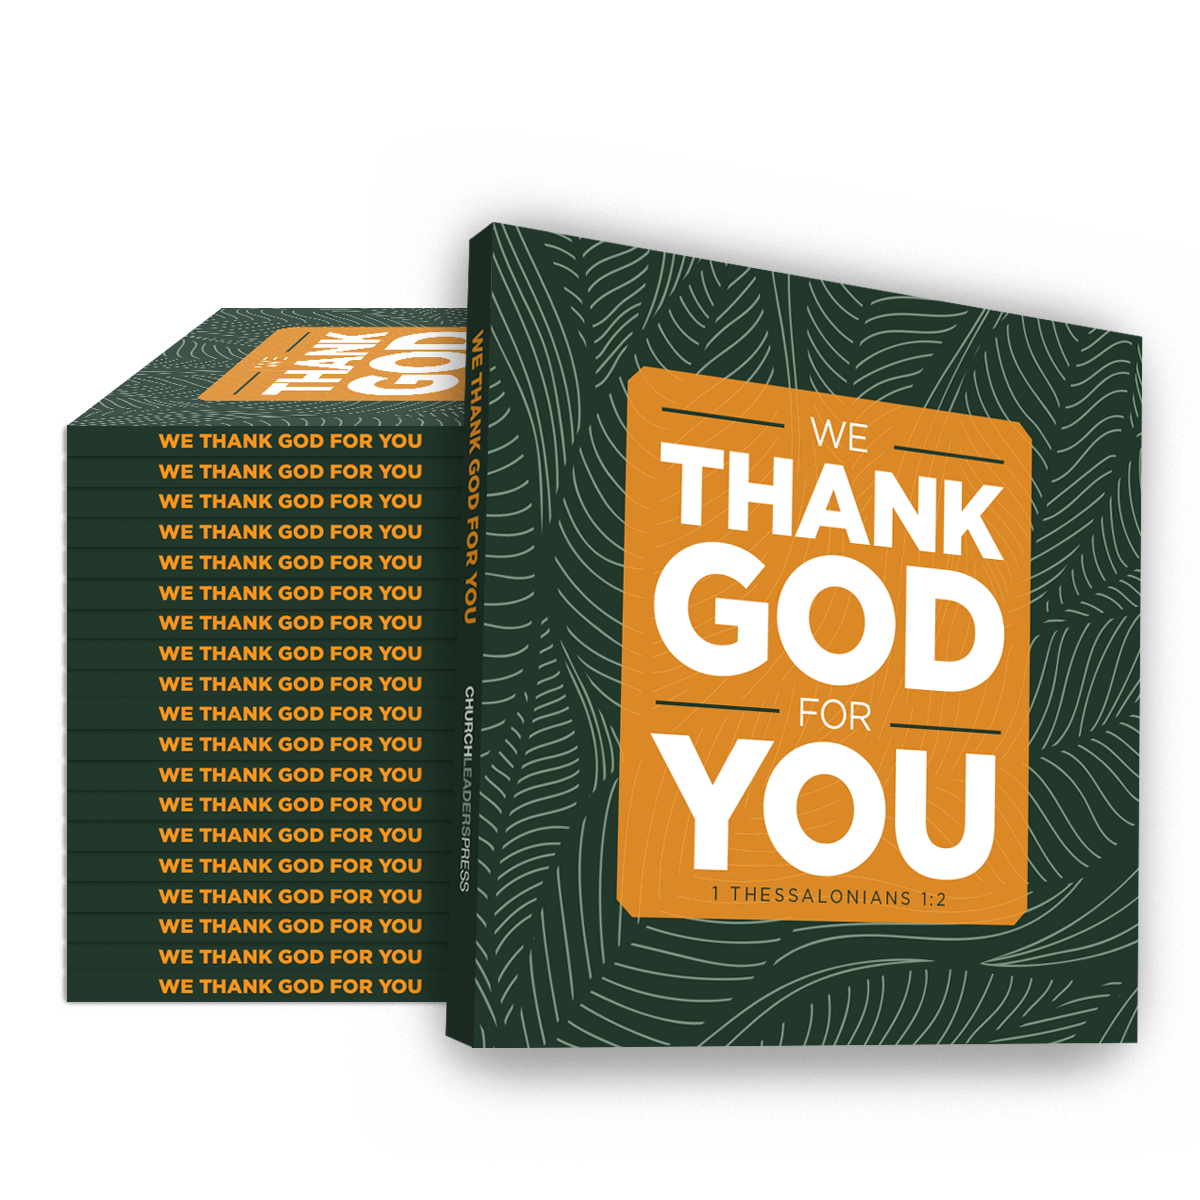 We Thank God for You — 20-Pack of Volunteer Gift Books